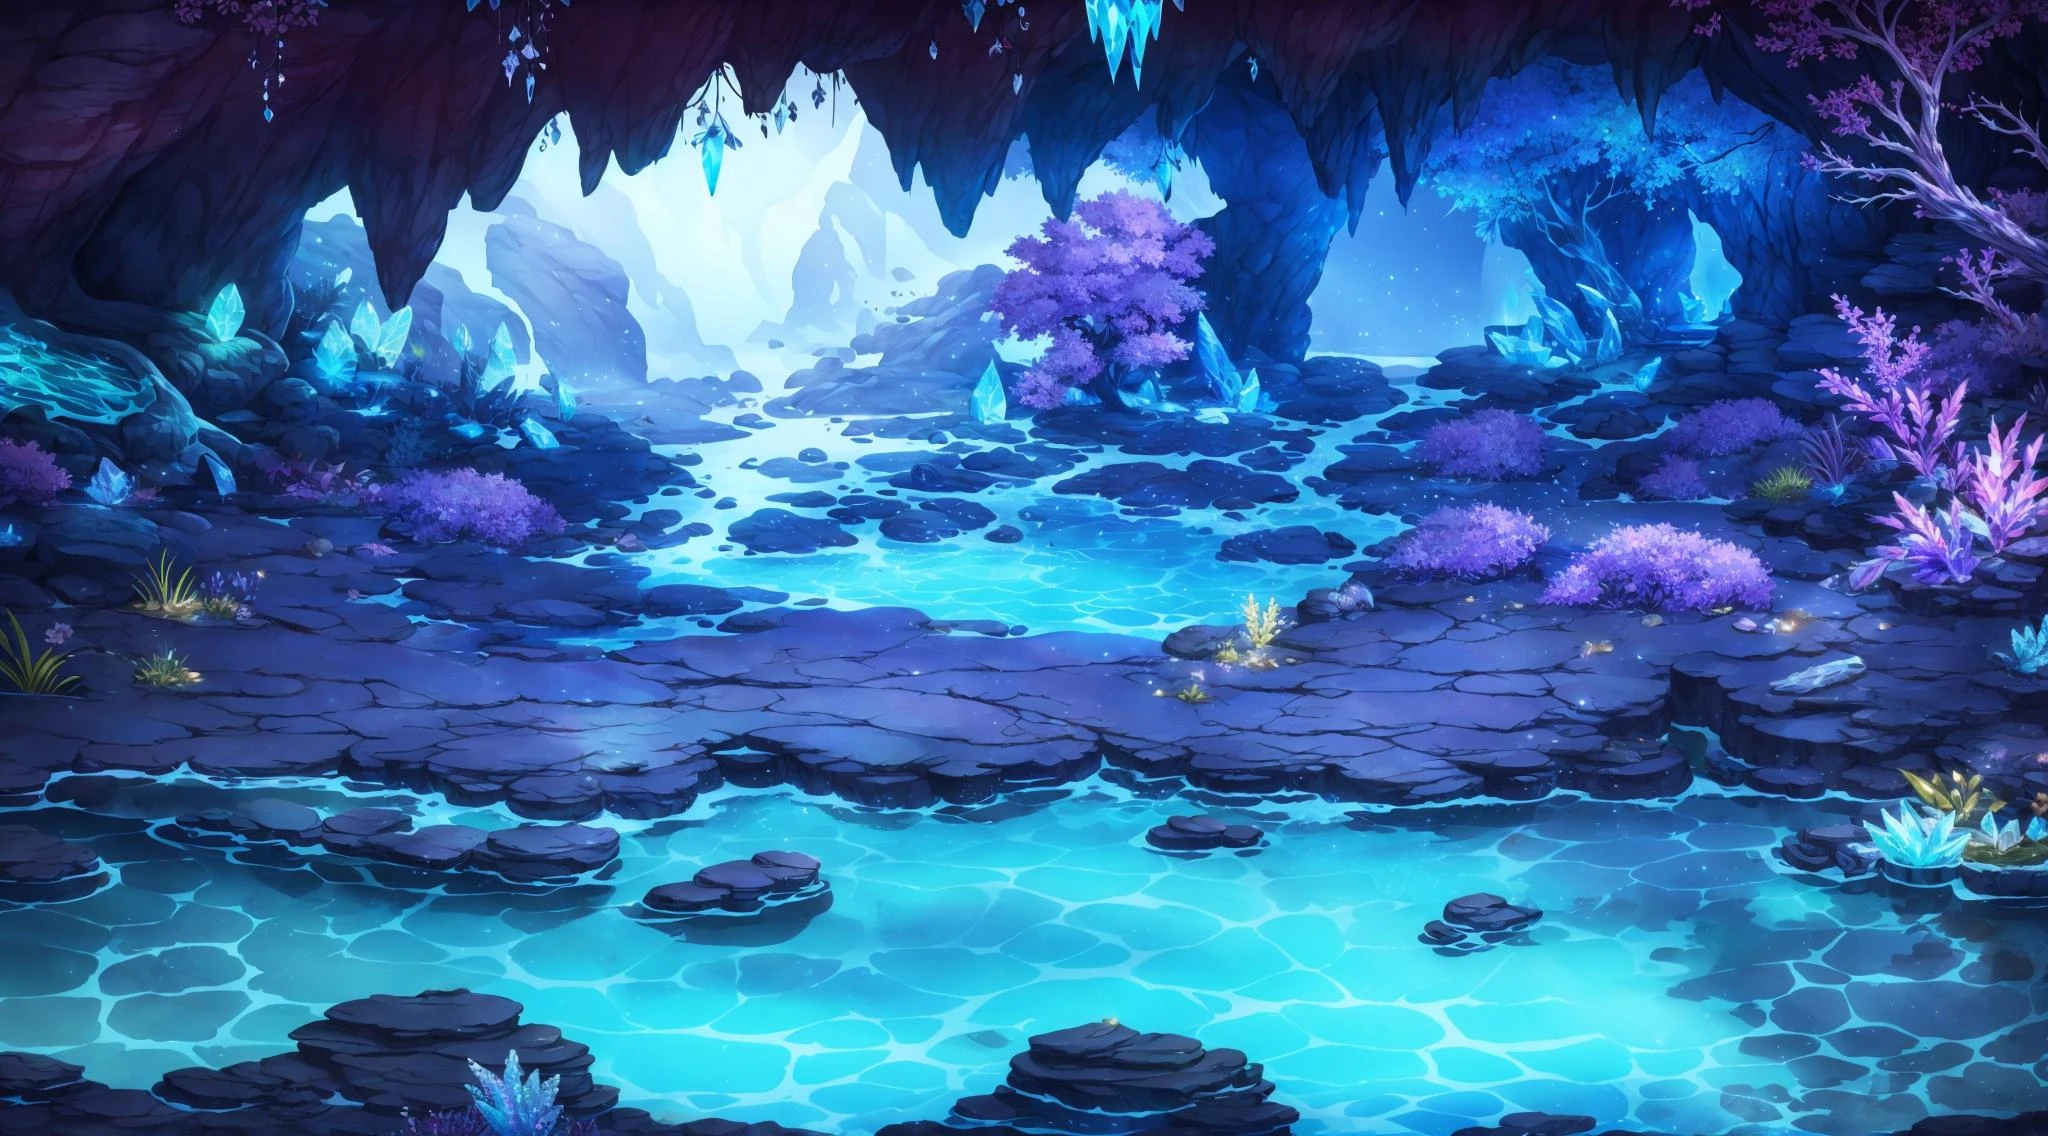 Concept art, horizontal scenes, horizontal line composition, no humans, scenery, outdoors, water, tree, crystal, night, cave, rock,